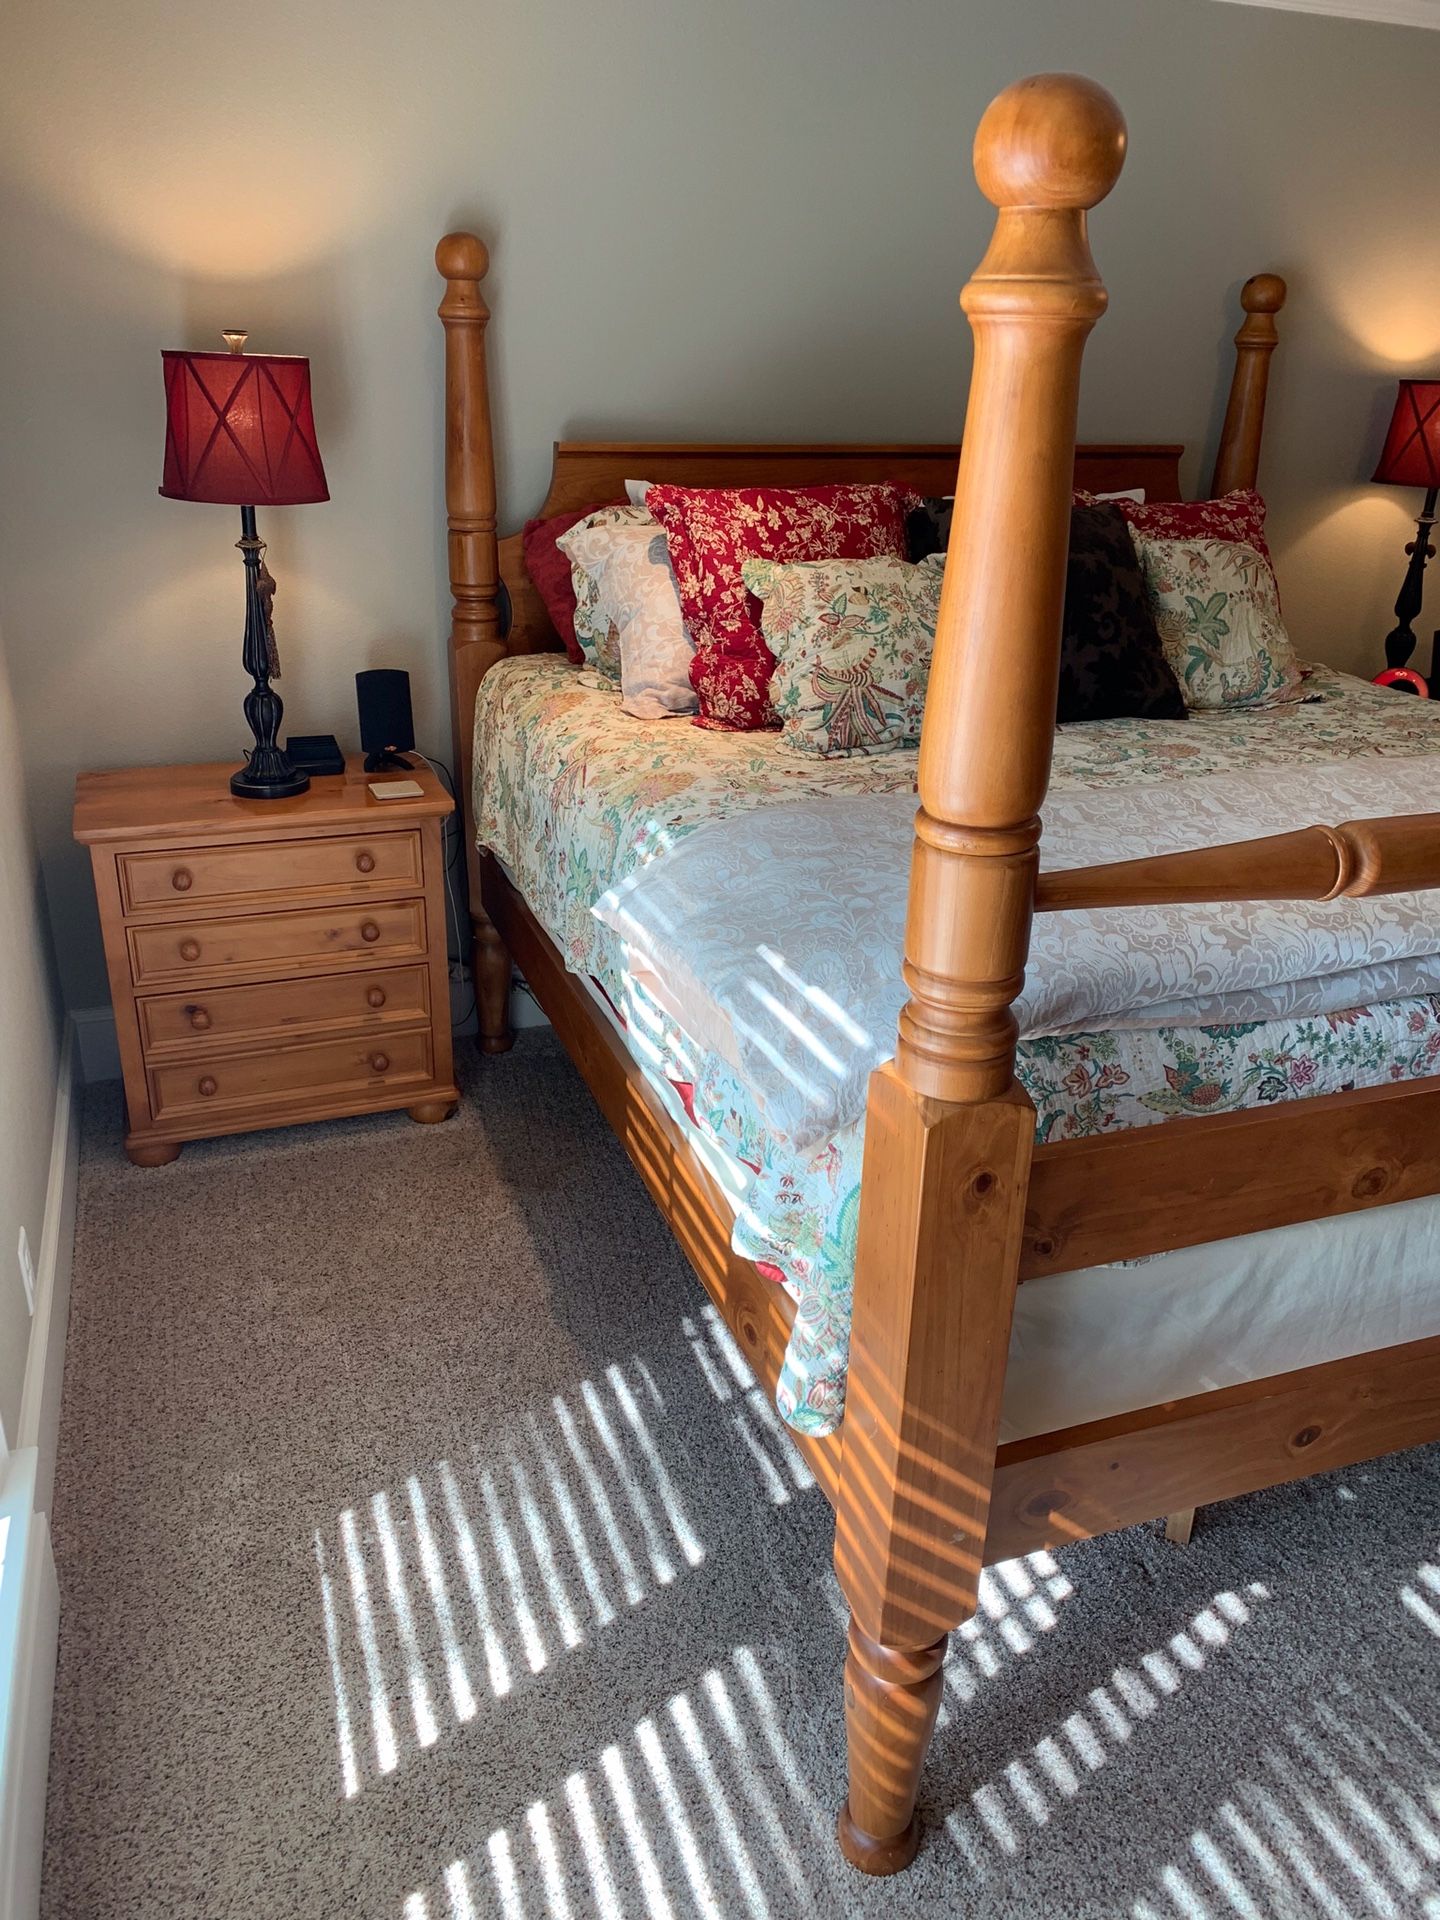 Extra-tall, Heavy-duty Oak King Bed Set (includes bed frame, box spring, mattress and both night stands) - $400